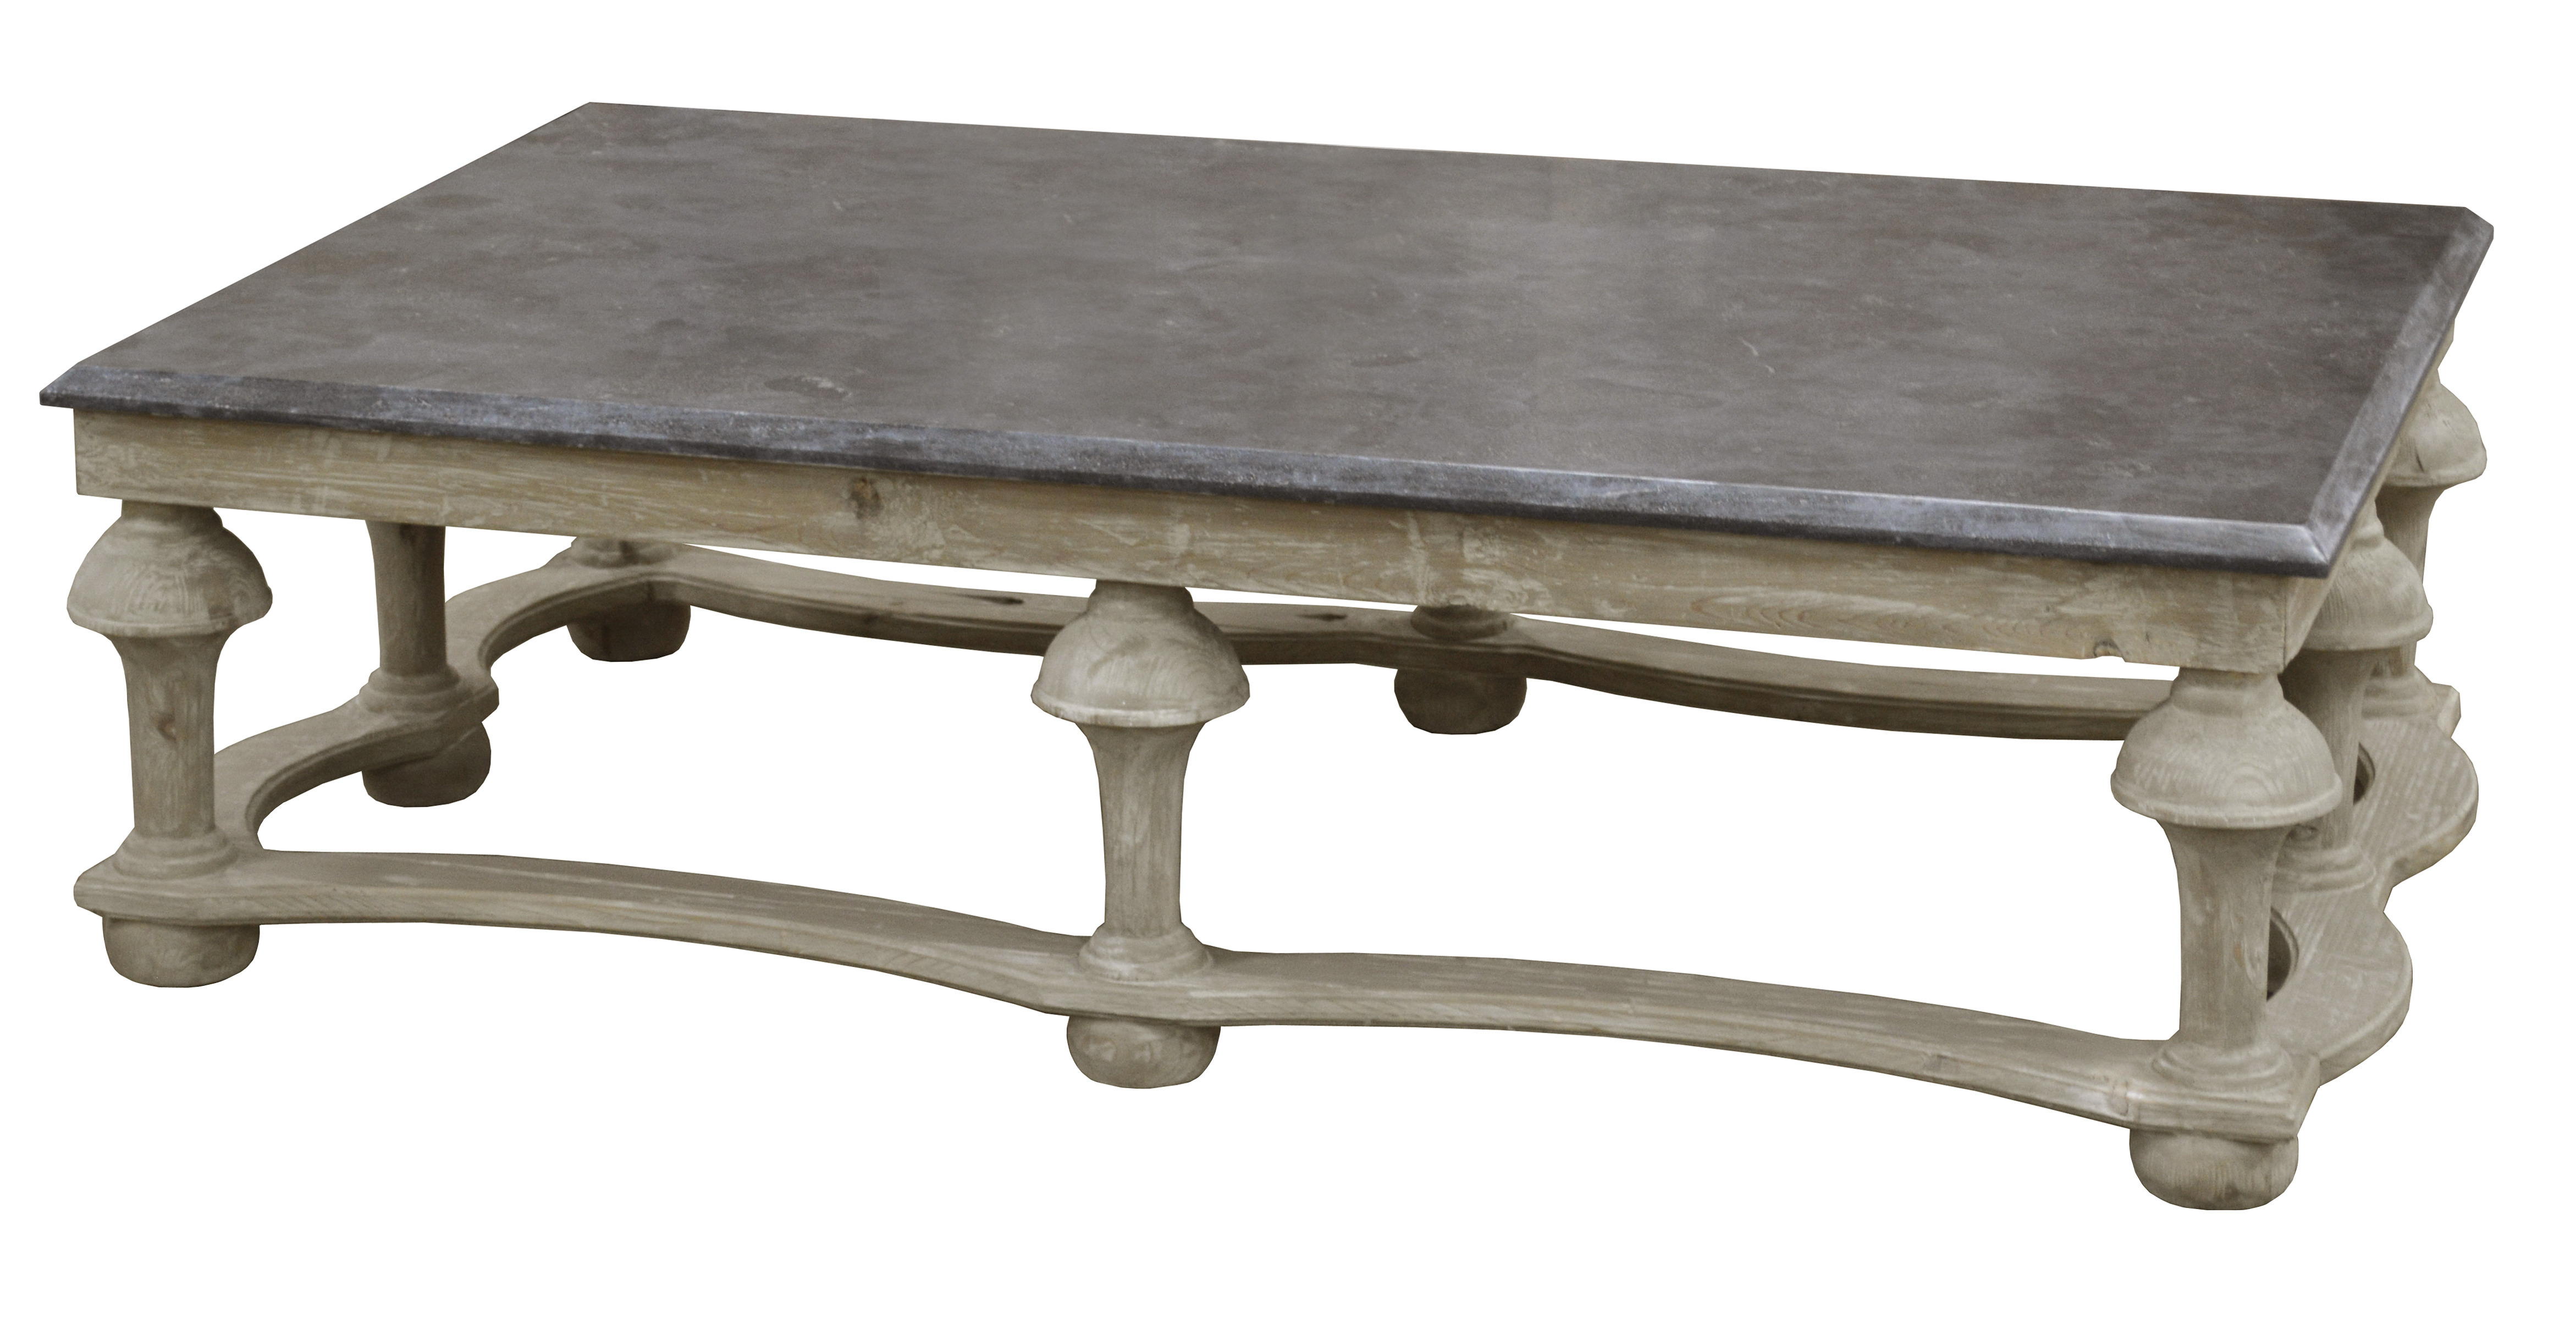 Stone Top Coffee Table Gj Styles Furnitureland South The within proportions 4685 X 2428